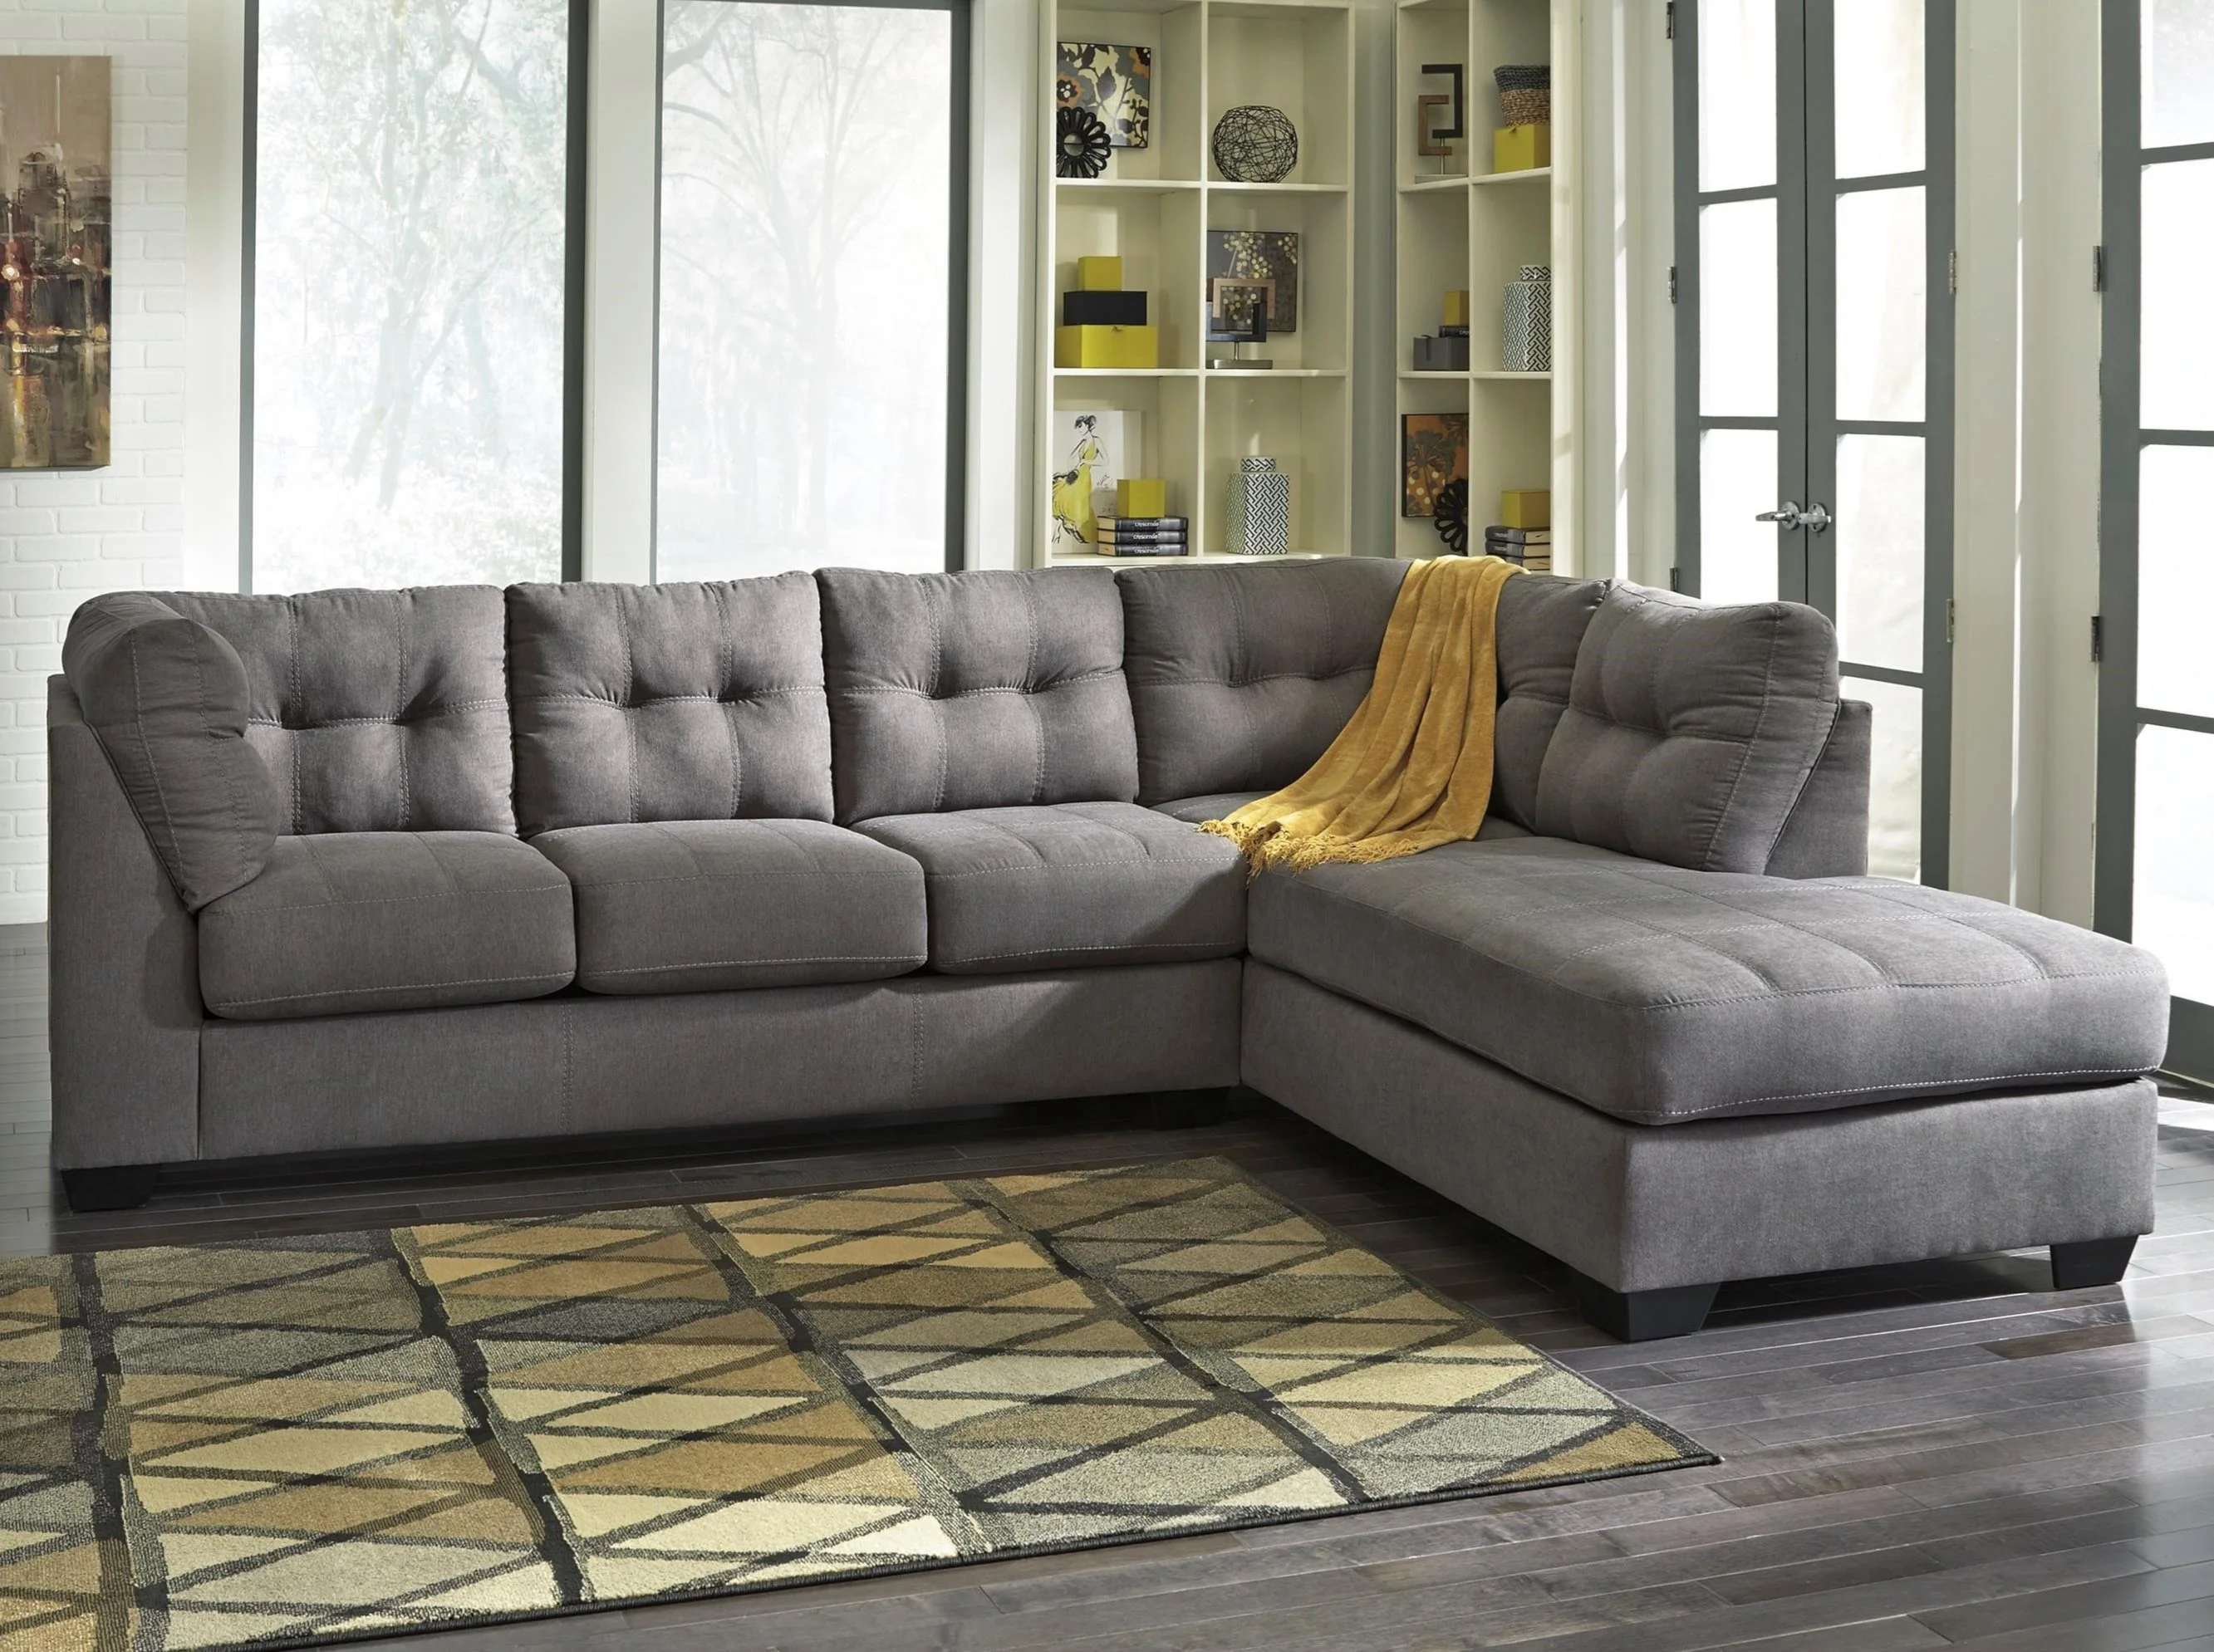 Benchcraft Maier 45220s4 2 Piece Sleeper Sectional With Right Chaise Virginia Furniture Market